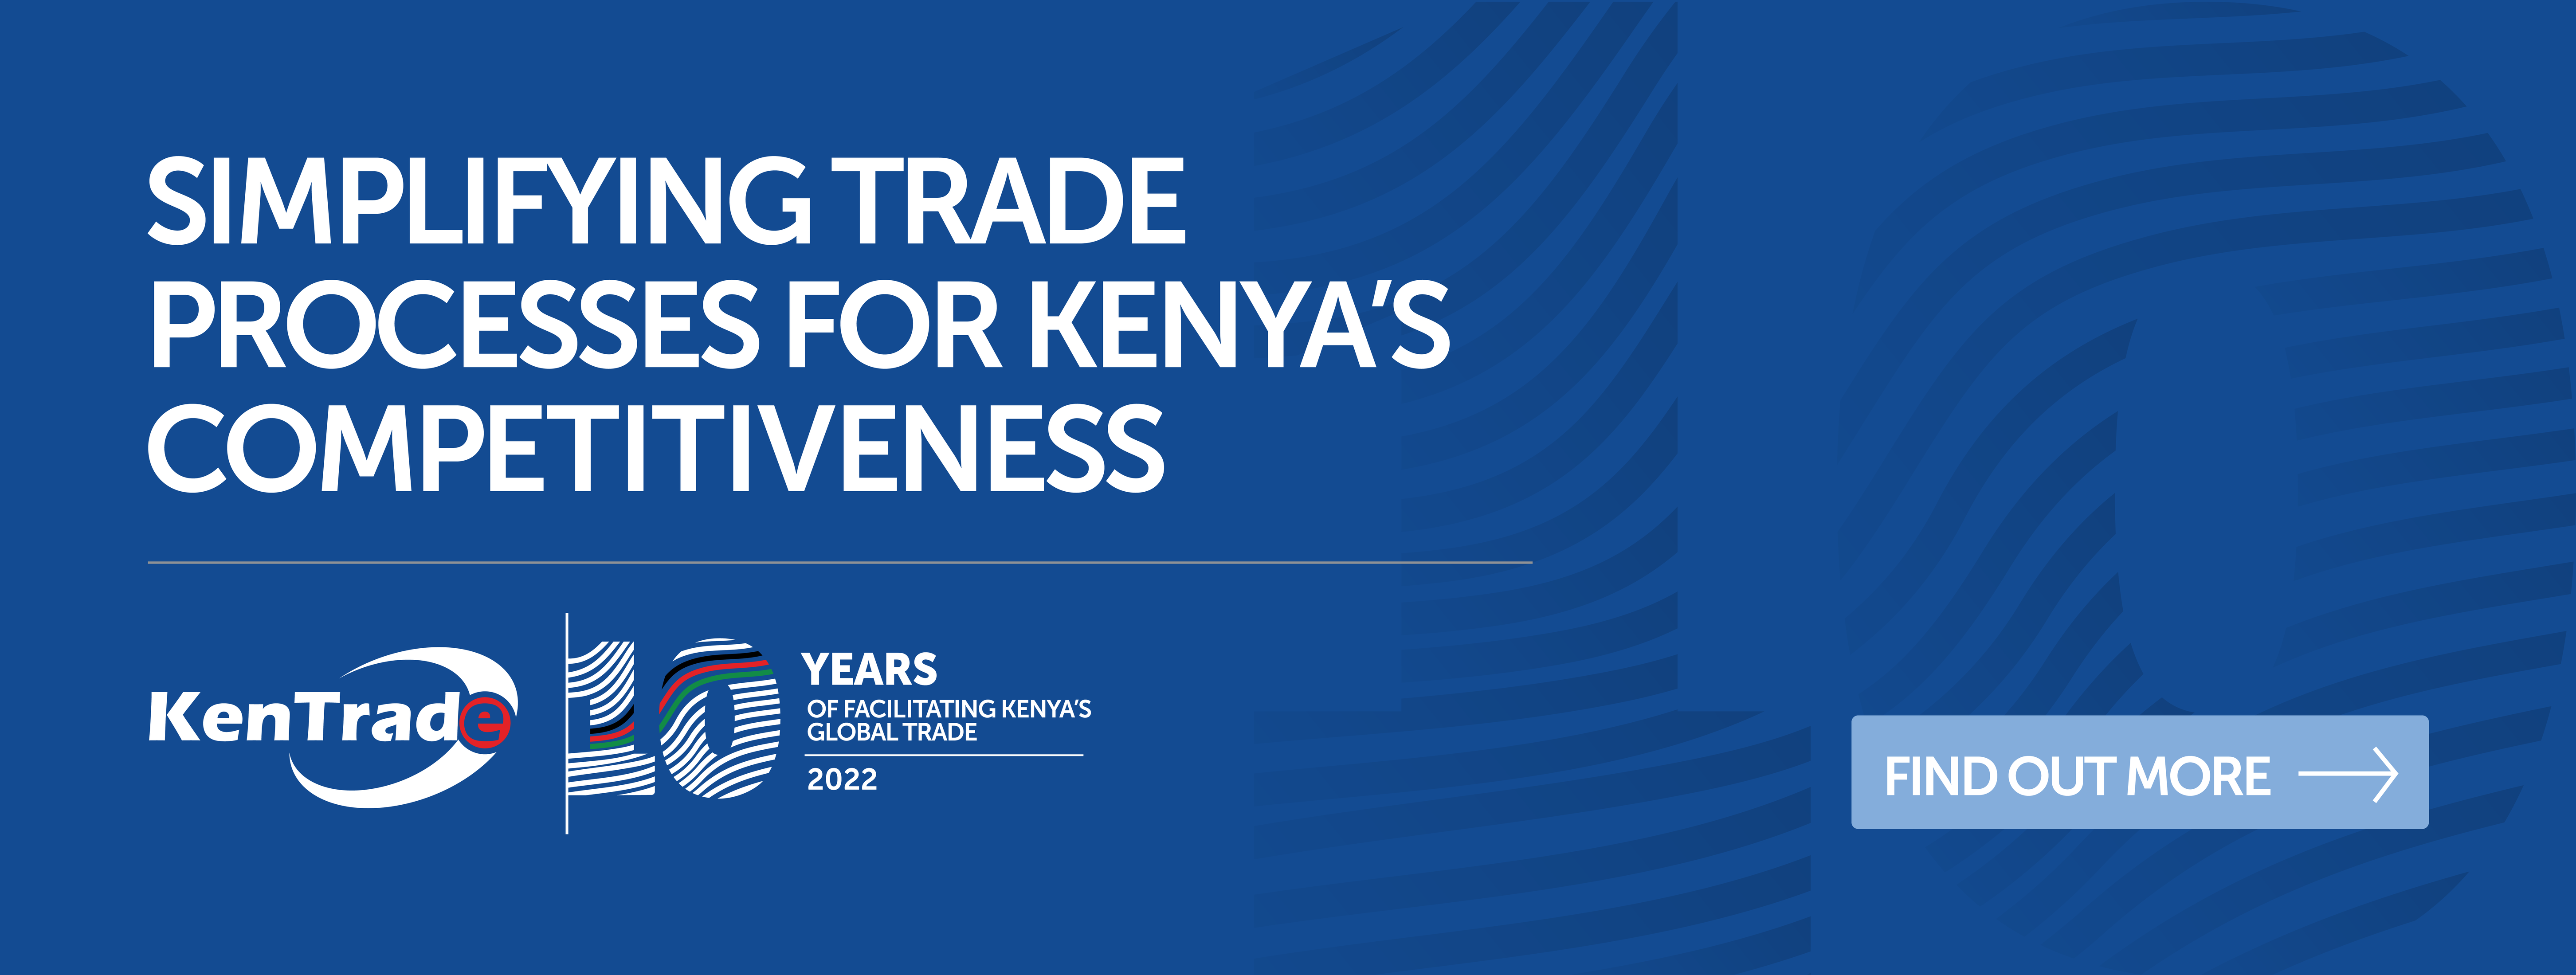 Banner on KenTrade celebrating 10th Anniversary on simplifying trade processes for Kenya`s competitiveness.